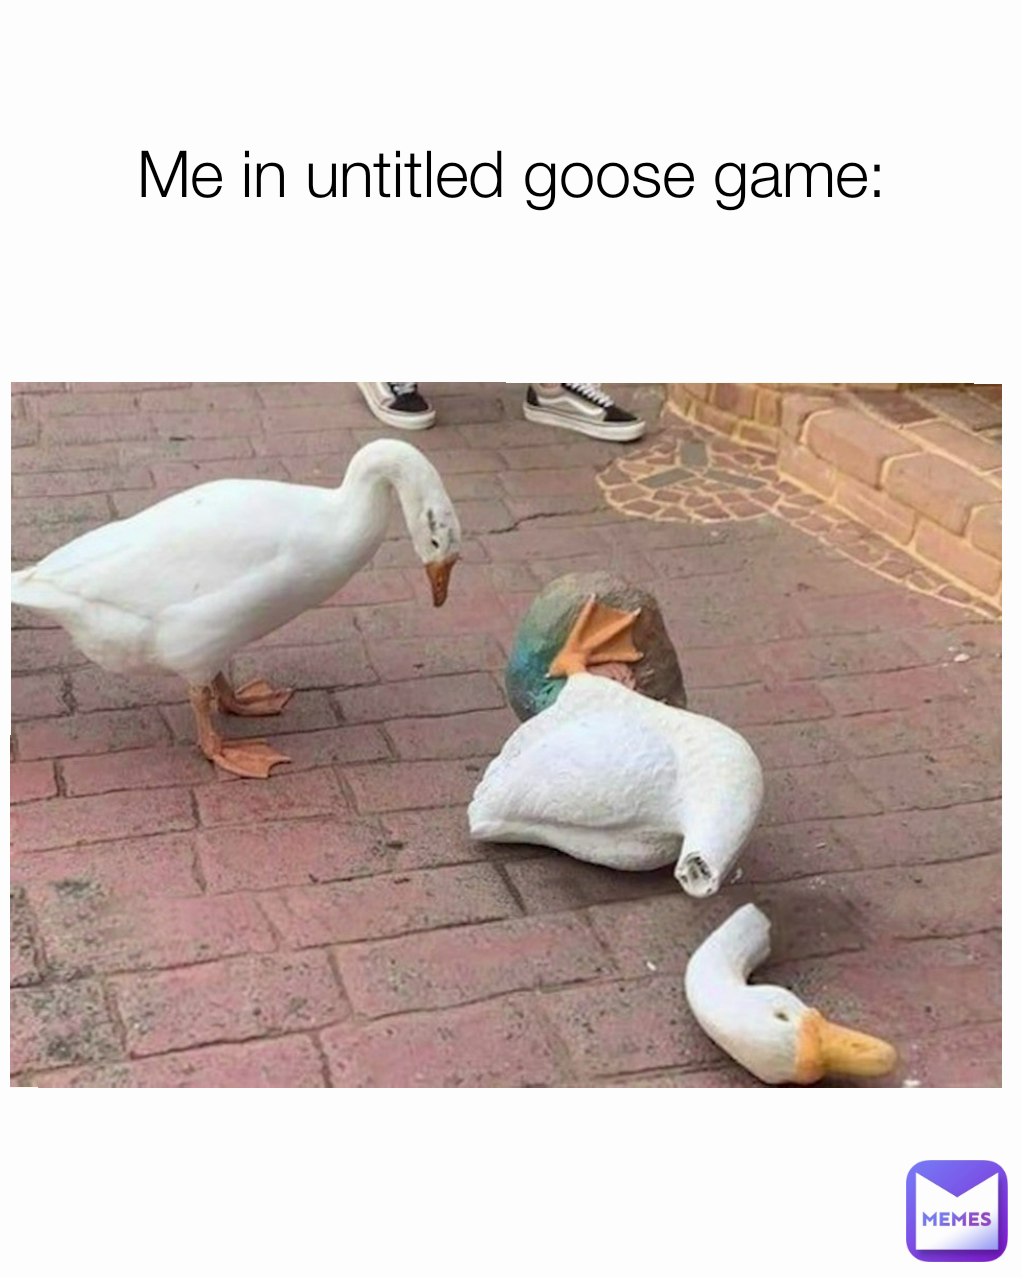 Me in untitled goose game: